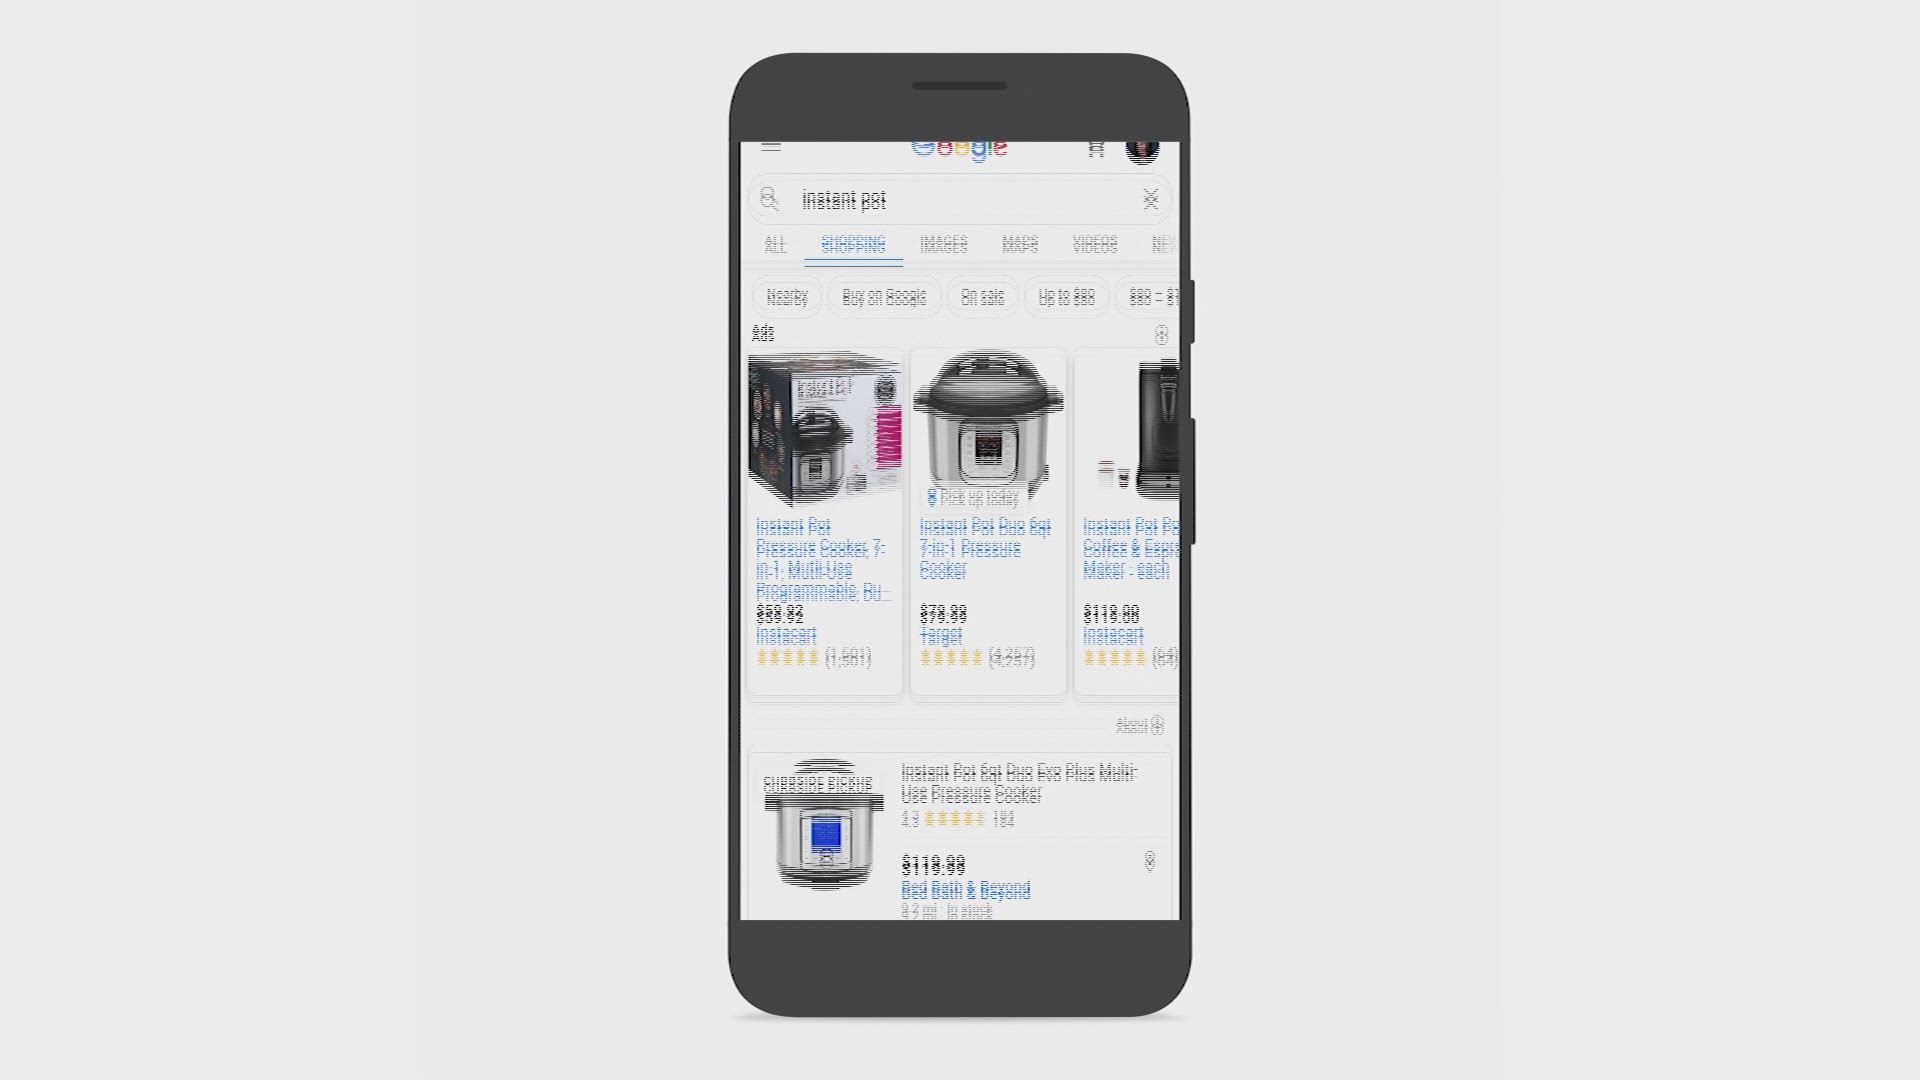 Google is making shopping easier for the upcoming holiday season with features that will save shoppers money.